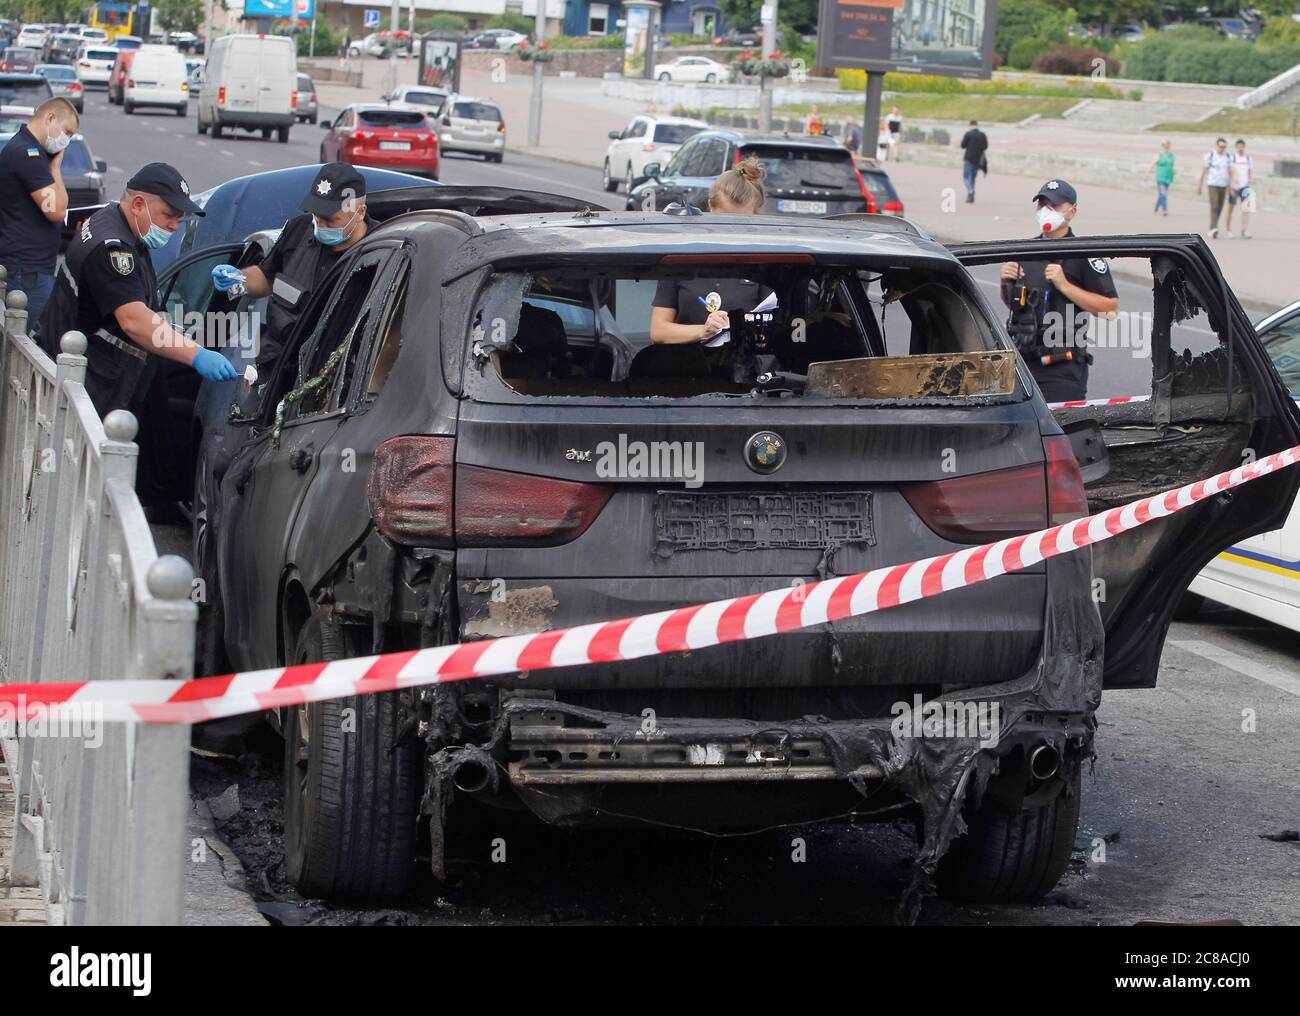 Ukrainian police experts investigate the scene of burned BMW X5 car, after the fire in downtown Kiev. The fire engulfed two cars BMW X5 and Acura, which were parked on the roadside, the State Service of Ukraine for Emergencies facebook page informed. As a result of the fire, the BMW X5 was completely destroyed and the Acura partially destroyed. The cause of the fire is currently being established by police. There are no victims. Stock Photo